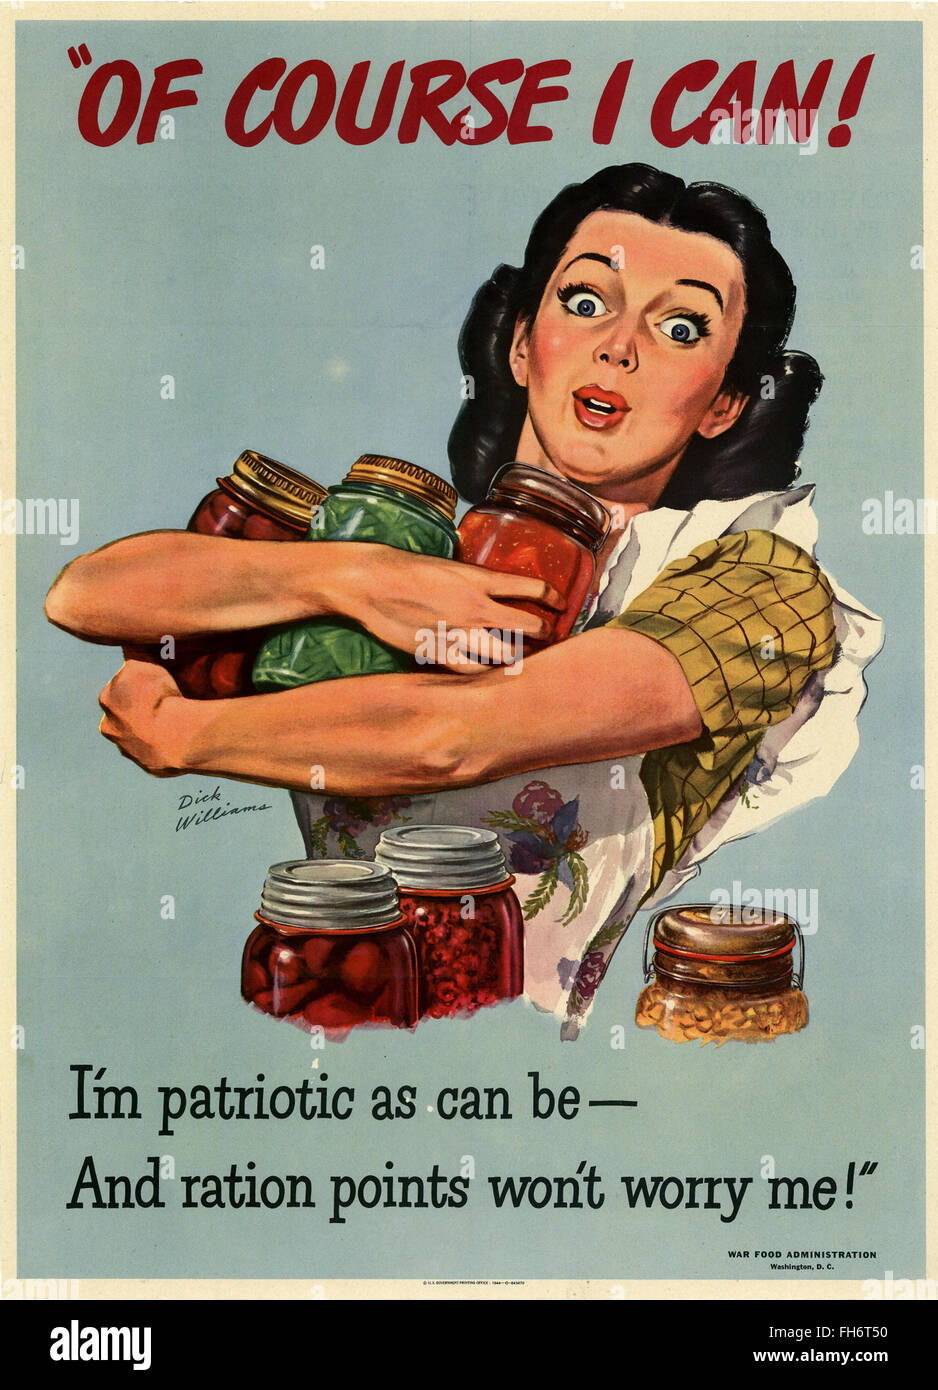 Conservation Food Canning  - US Propaganda Poster - WWII Stock Photo